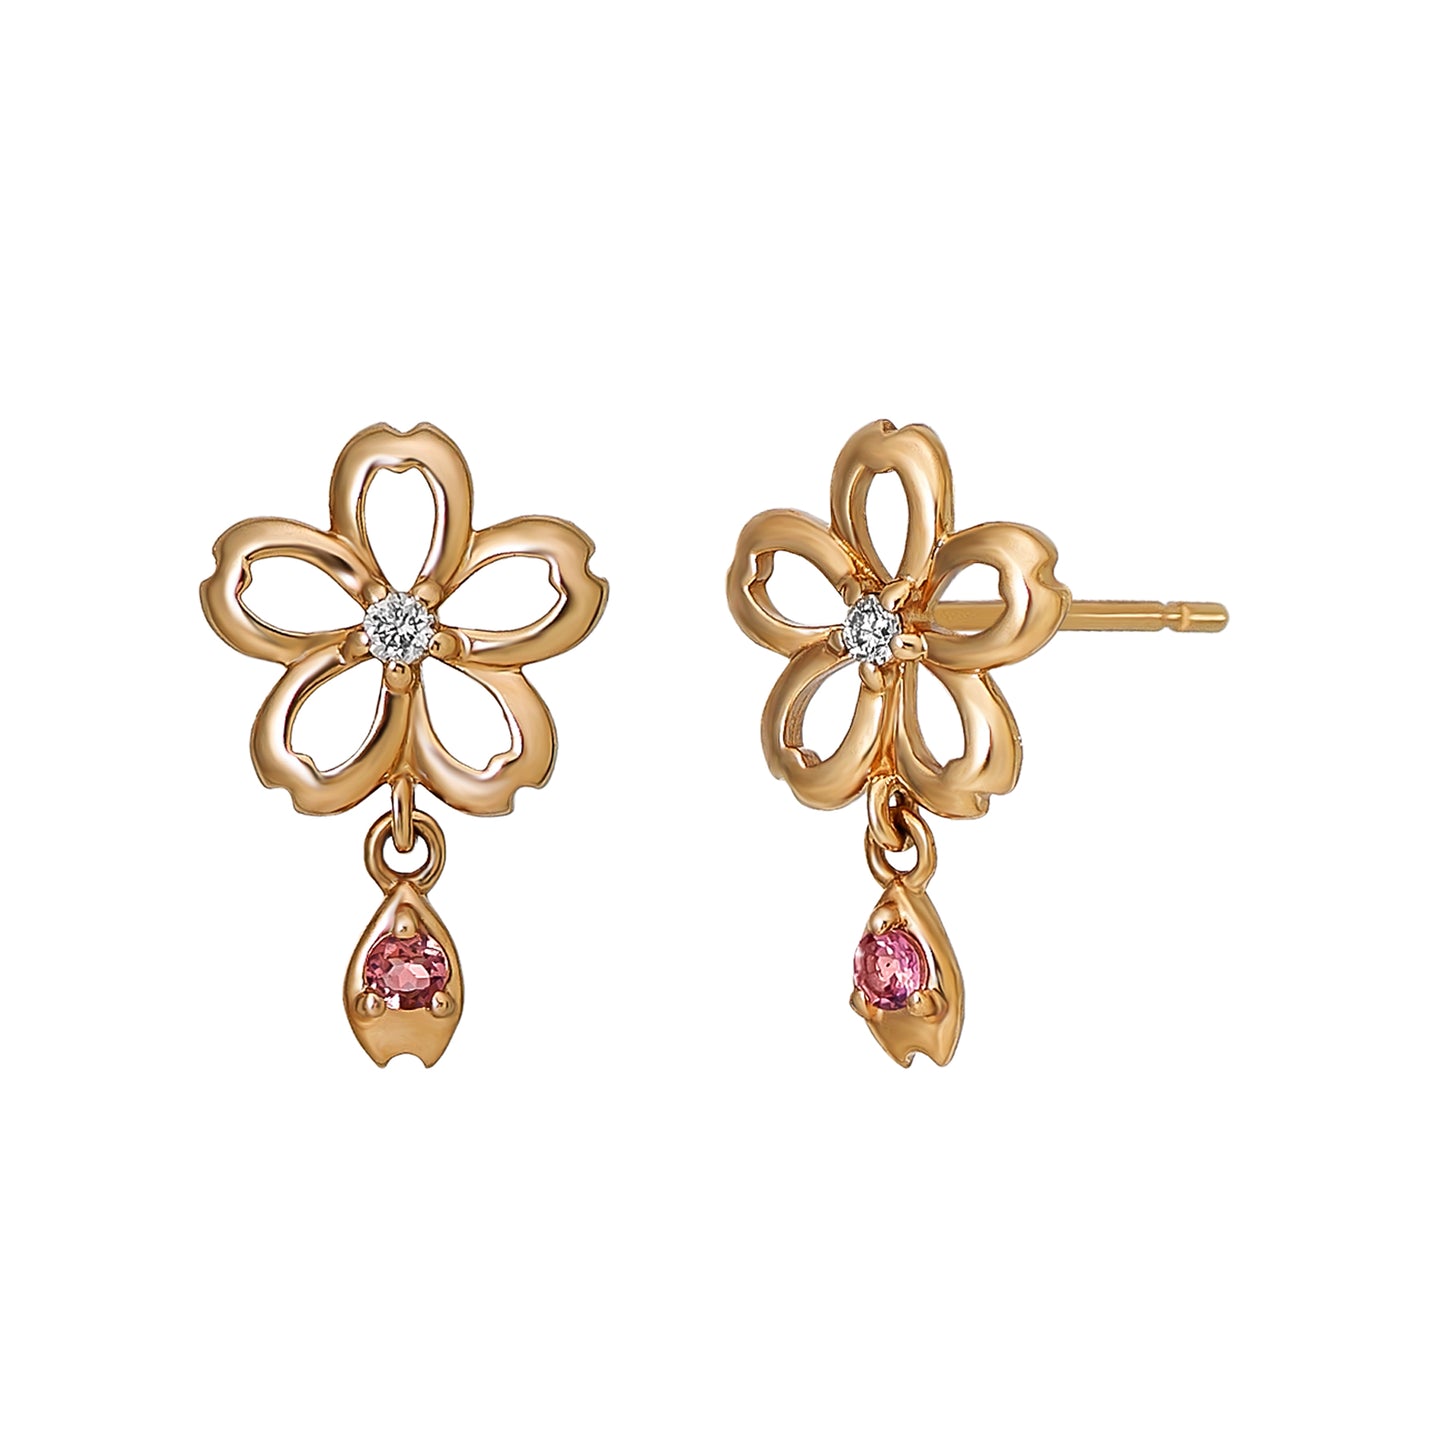 [Birth Flower Jewelry] April - Cherry Blossoms Openwork Earrings (18K/10K Rose Gold) - Product Image